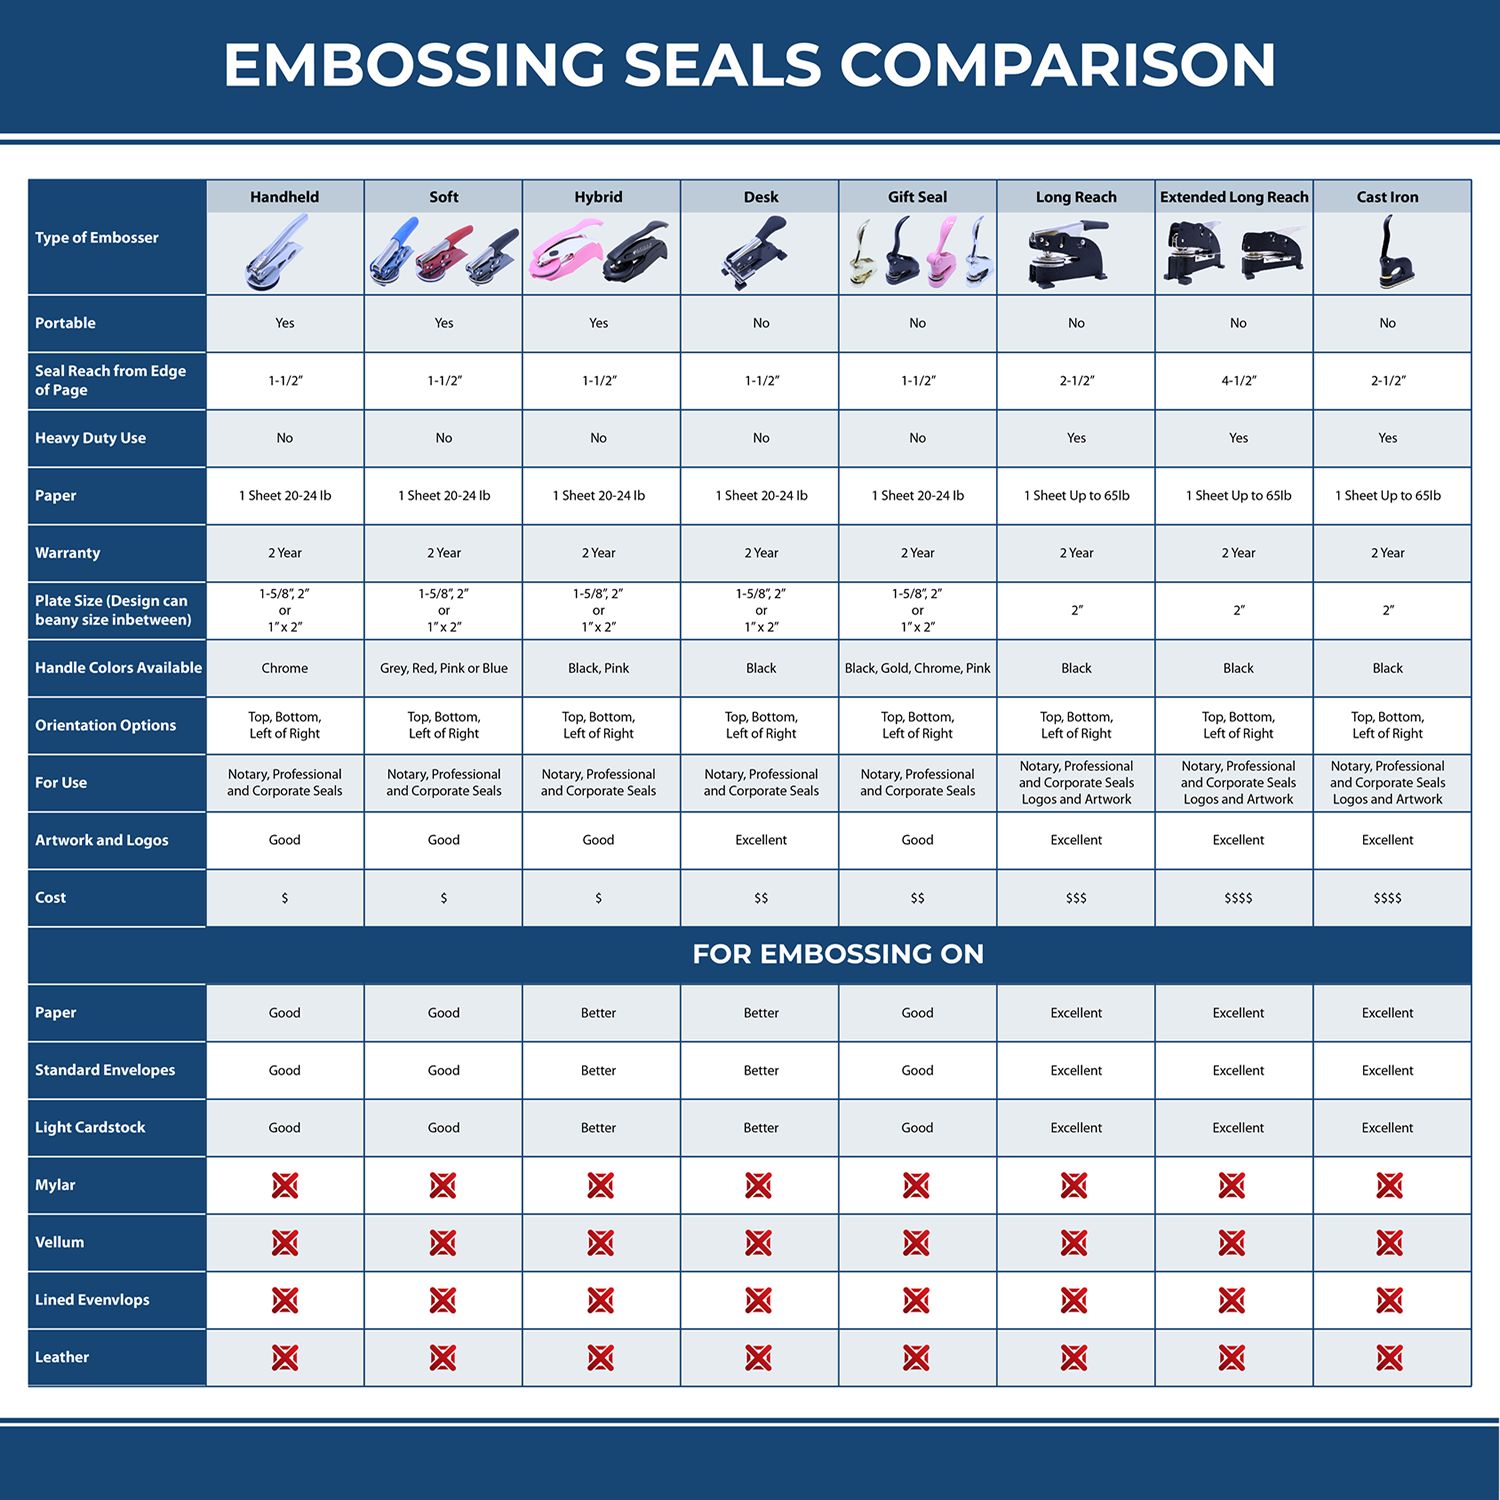 A comparison chart for the different types of mount models available for the Heavy Duty Cast Iron Oklahoma Land Surveyor Seal Embosser.